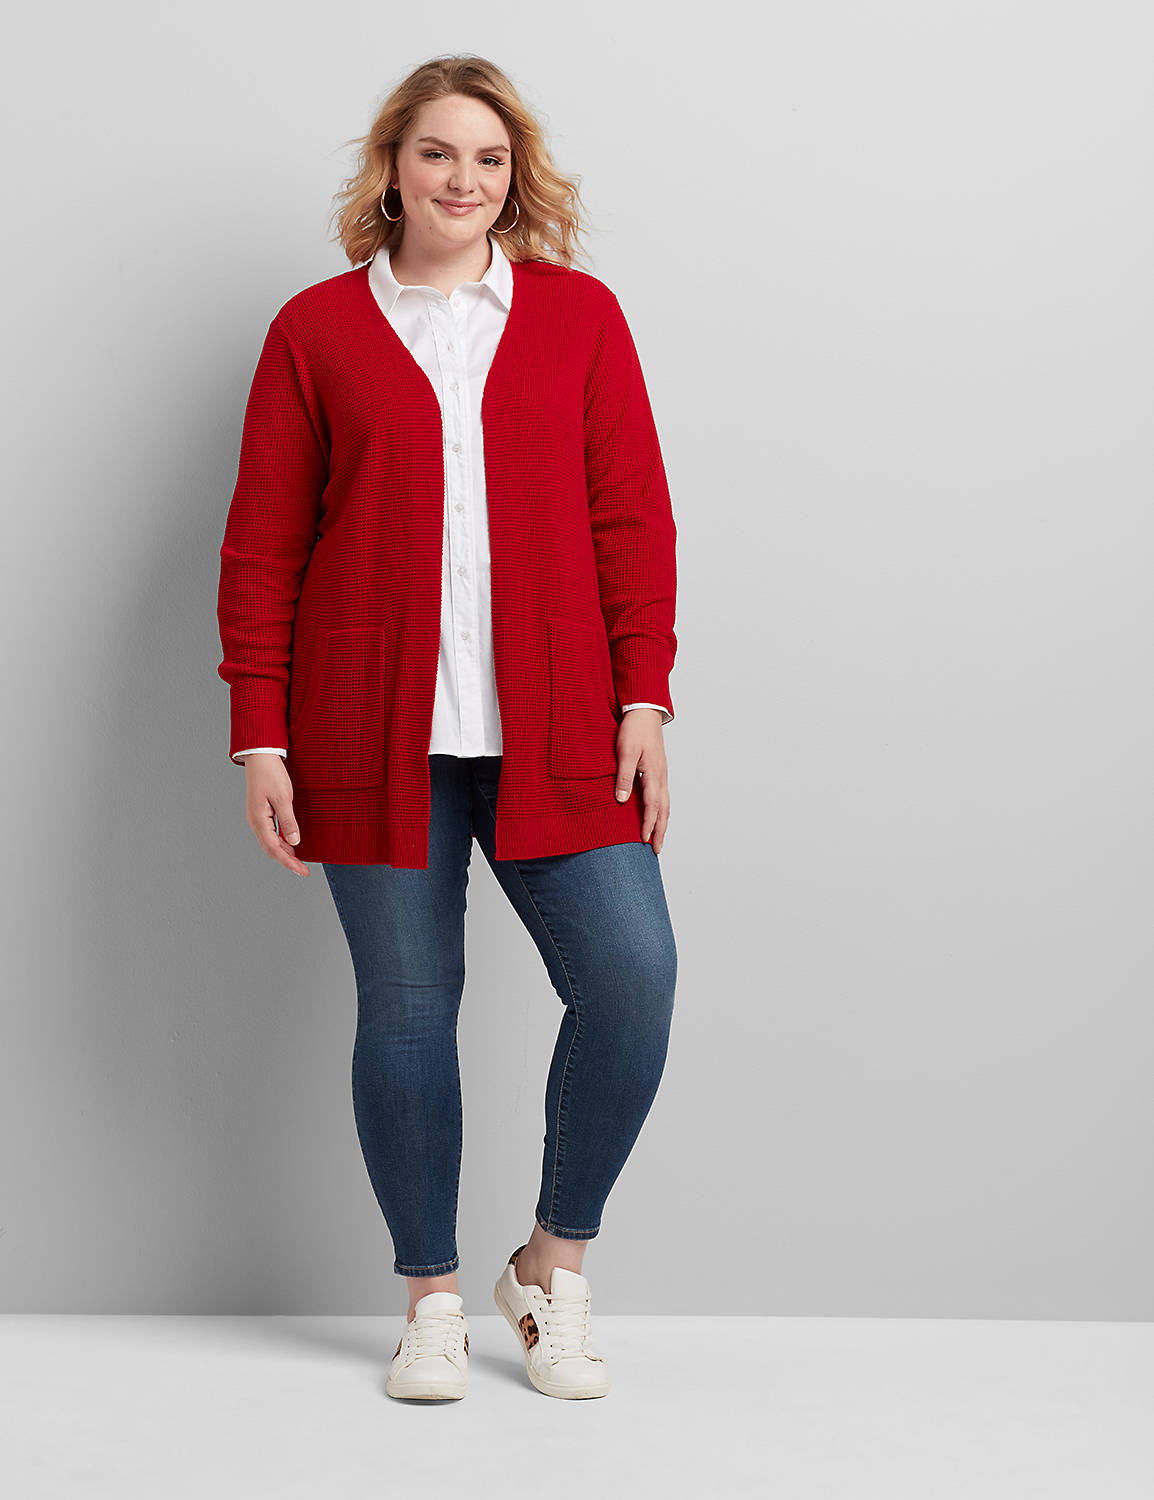 LONG SLEEVE OPEN FRONT PATCH POCKET WAFFLE STITCH CARDIGAN 1113637:PANTONE Haute Red:10/12 Product Image 3